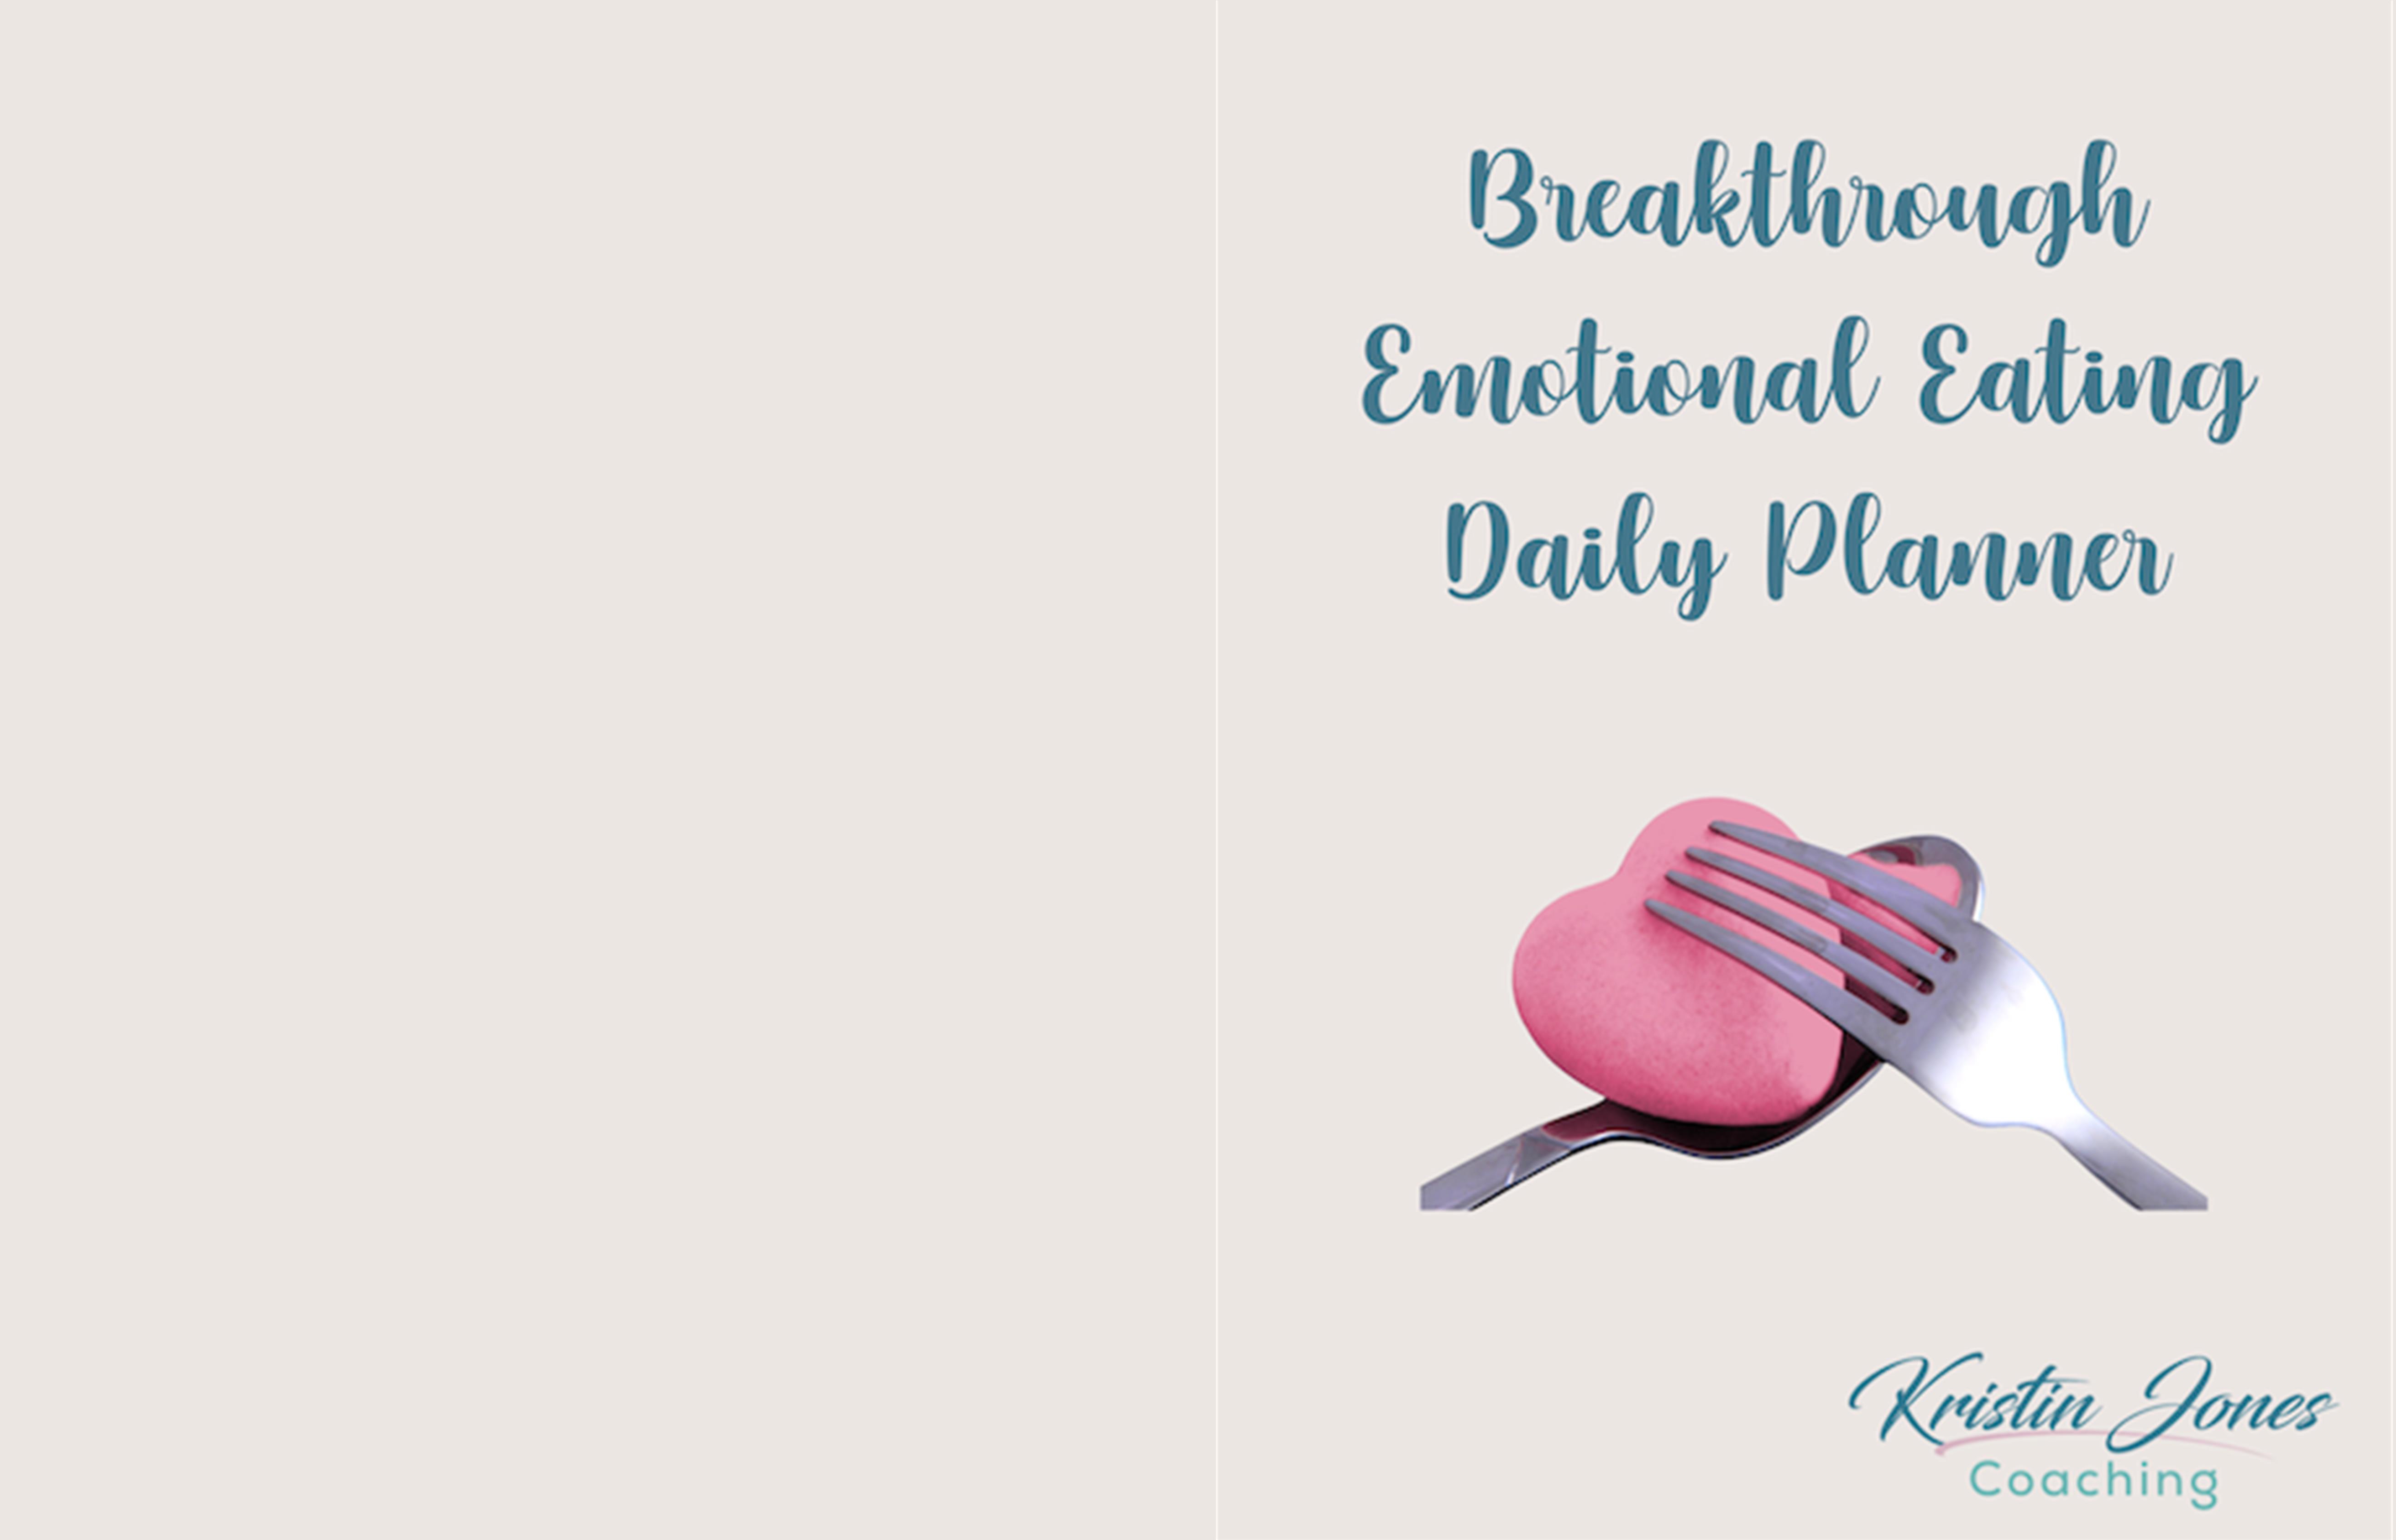 Breakthrough Emotional Eating Daily Planner (B/W) cover image